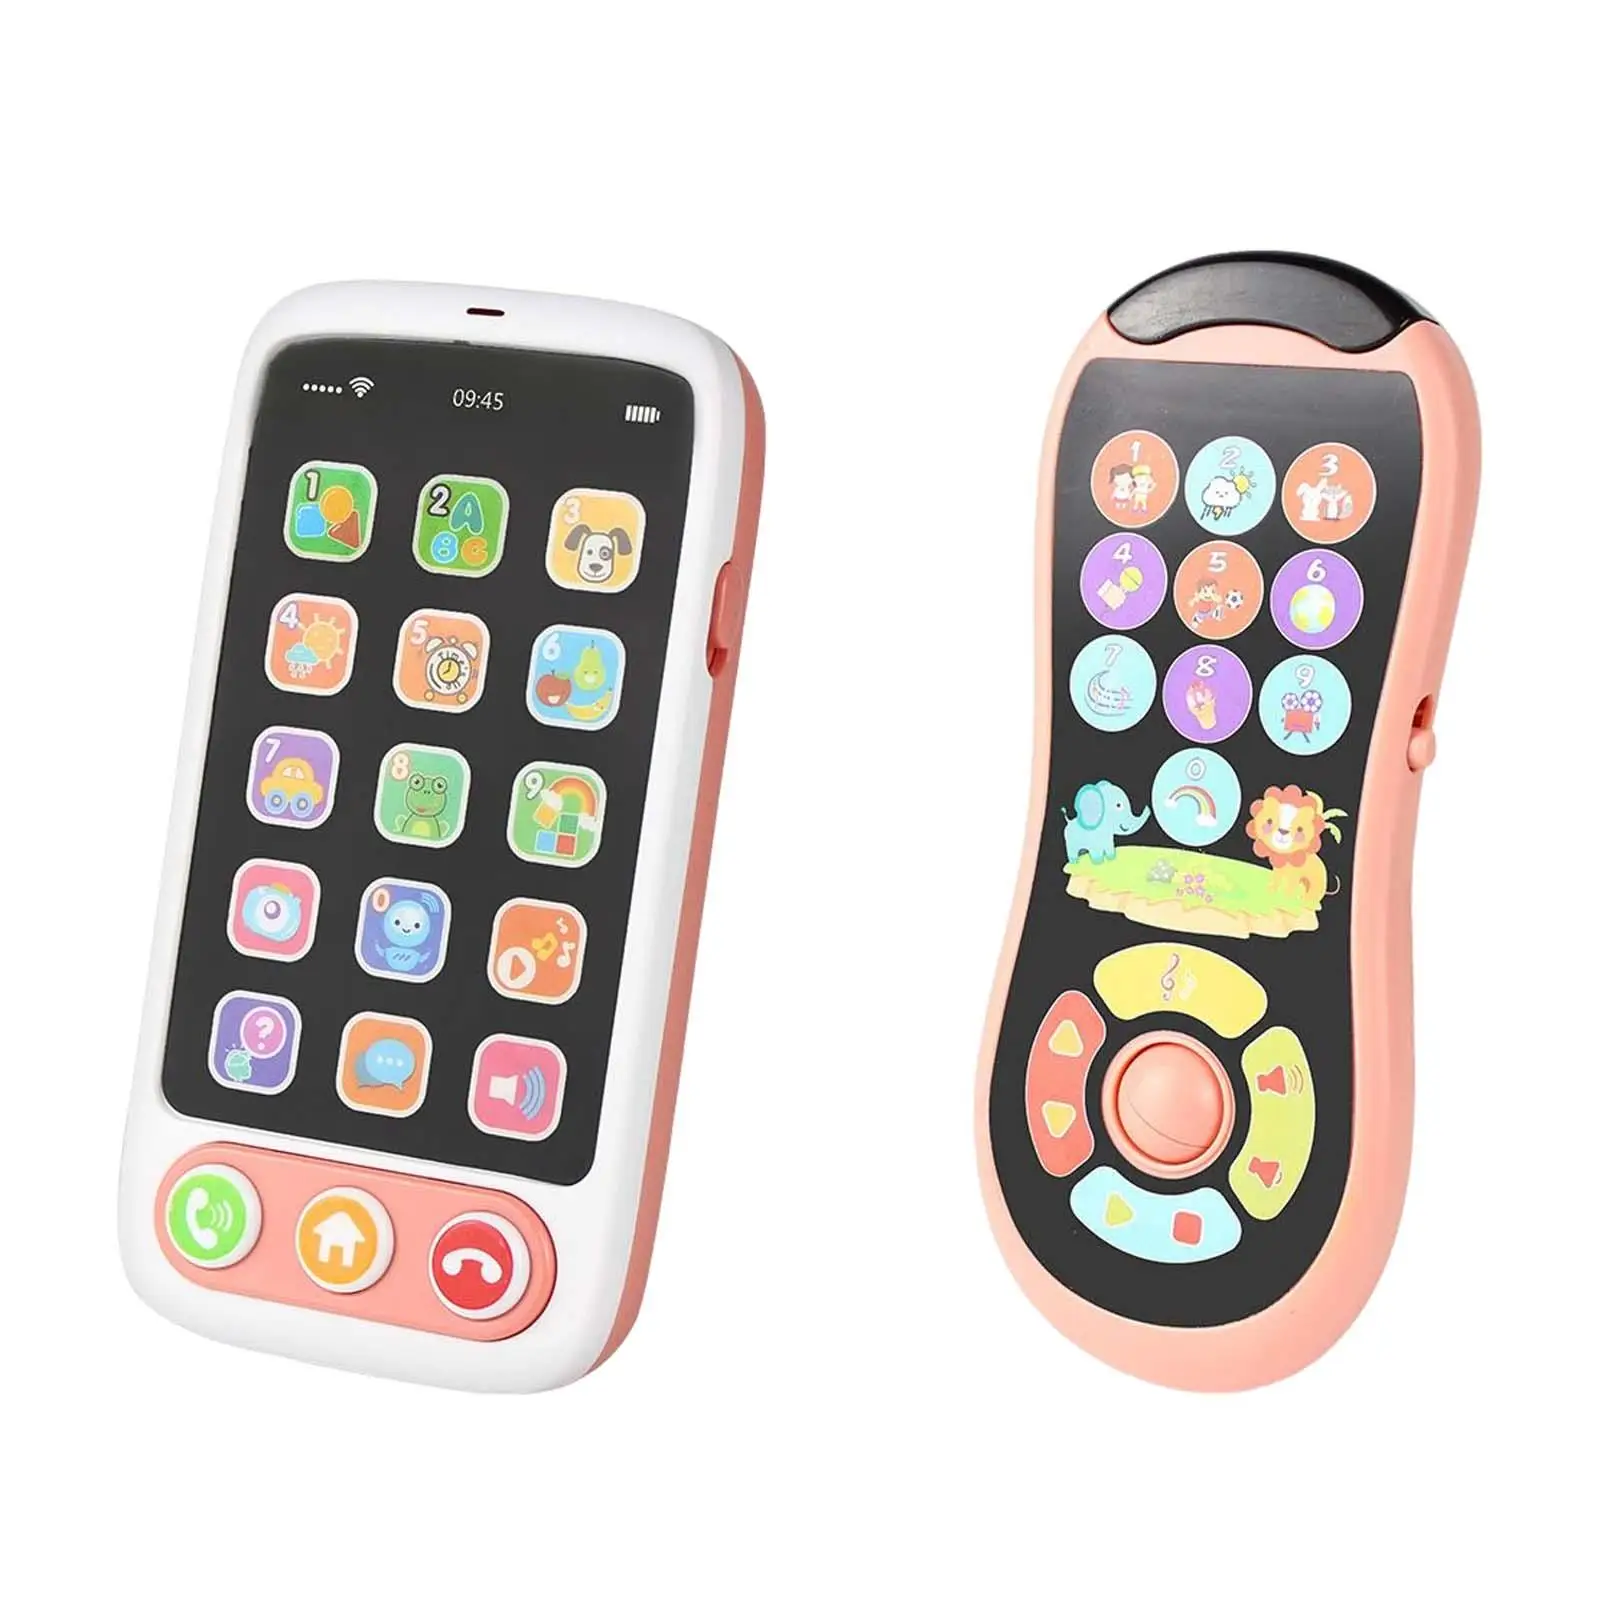 Portable Musical Phone Toys Learning Musical Toys Smartphone Toy for Preschool Toddlers Kids Boy Birthday Gift